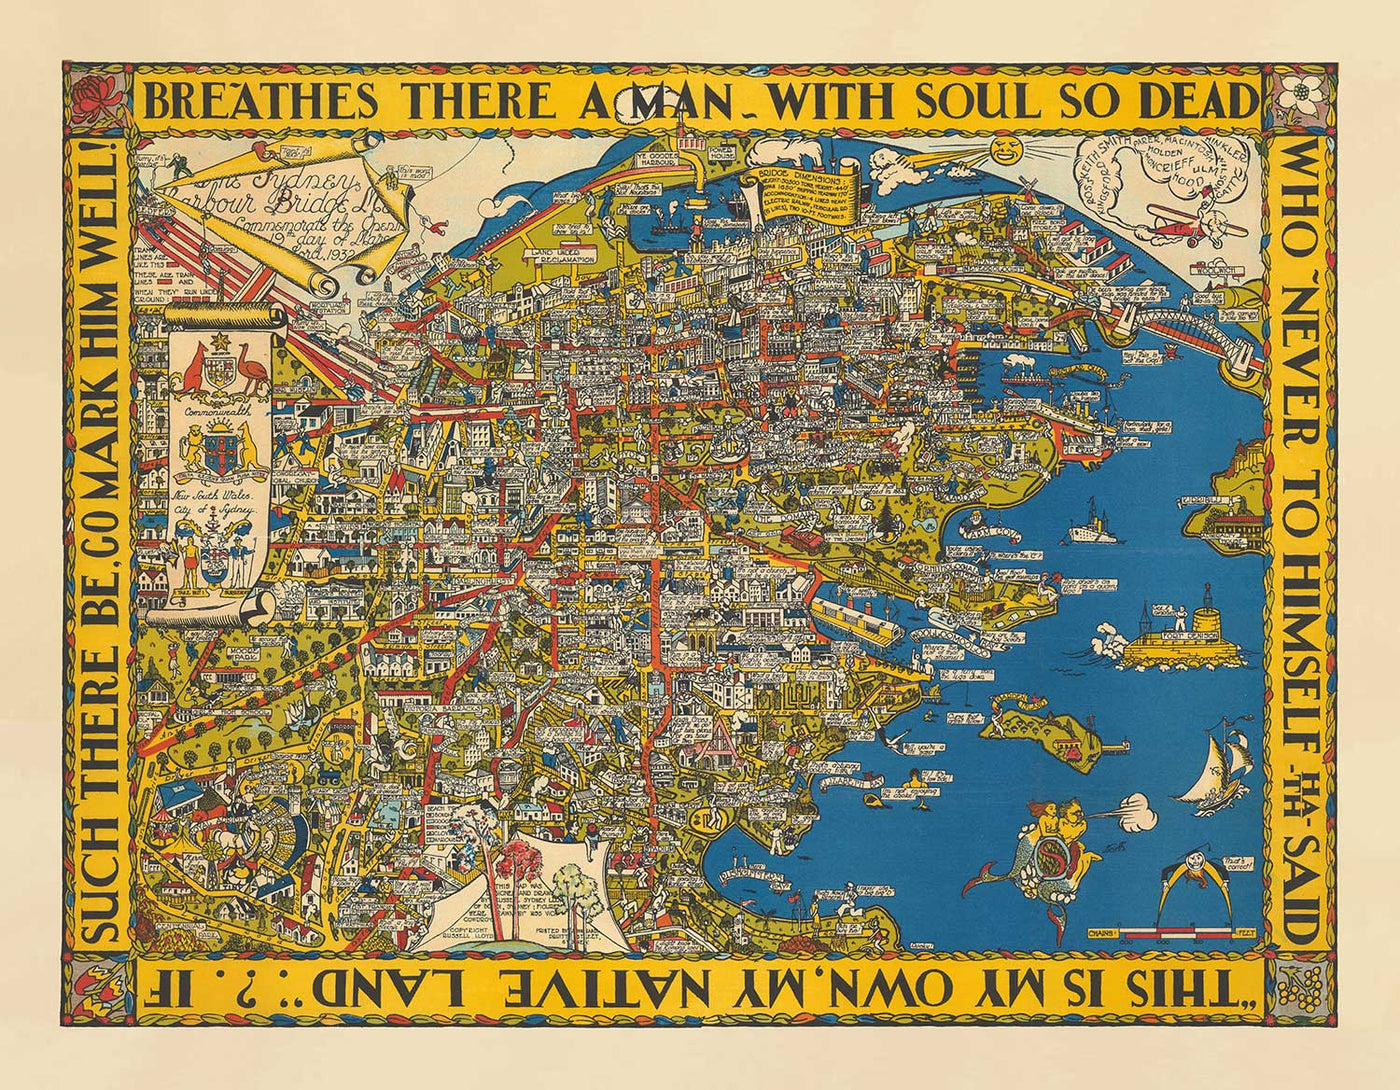 Old Pictorial Map of Sydney, 1932 by Russell Lloyd - Harbour Bridge, Bays, Central Station, Botanic Gardens & Mermaids!